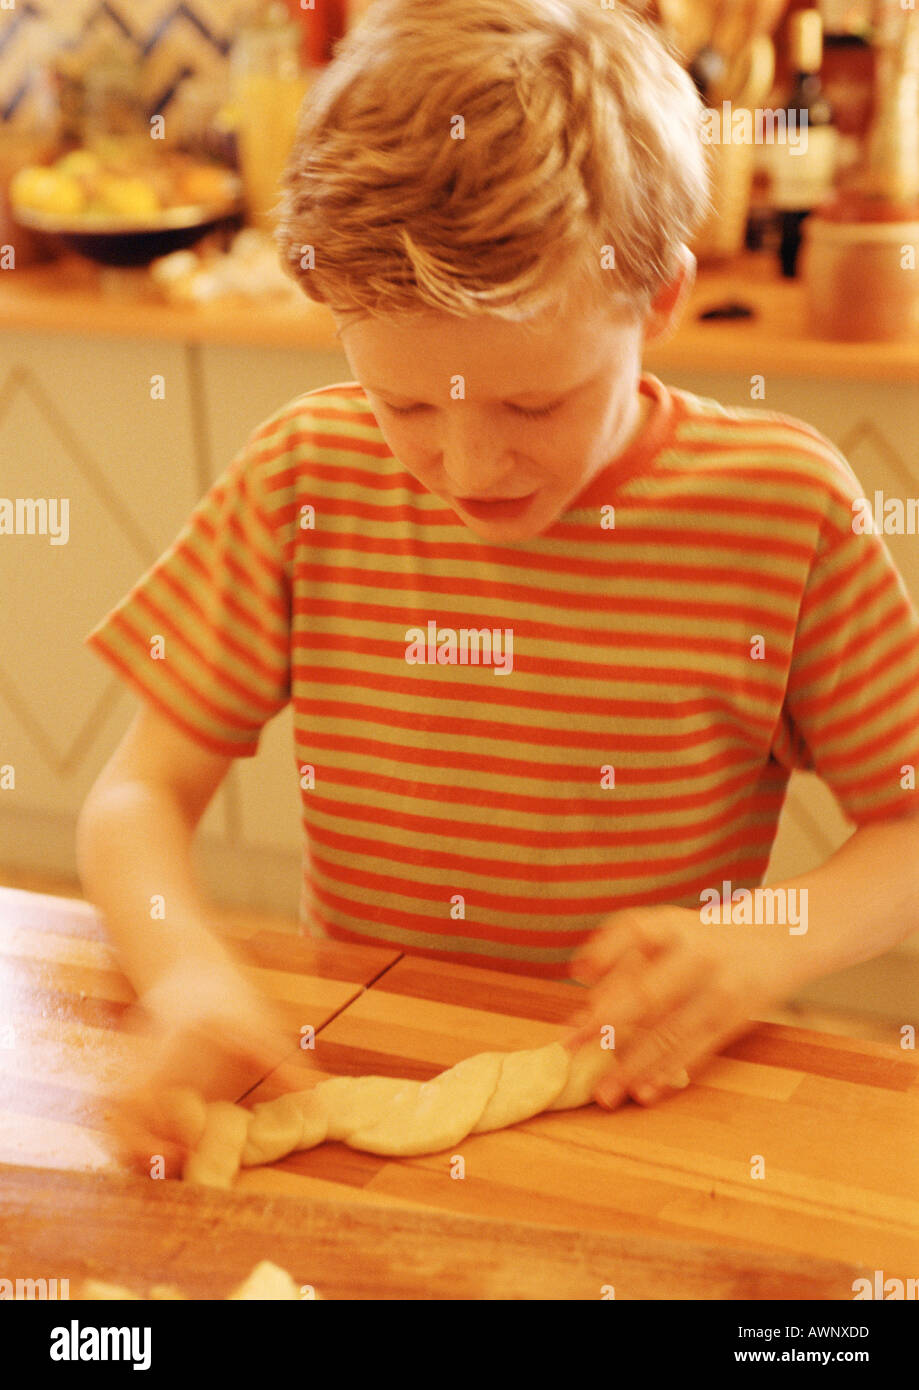 Child handling pastry dough, blurred motion Stock Photo